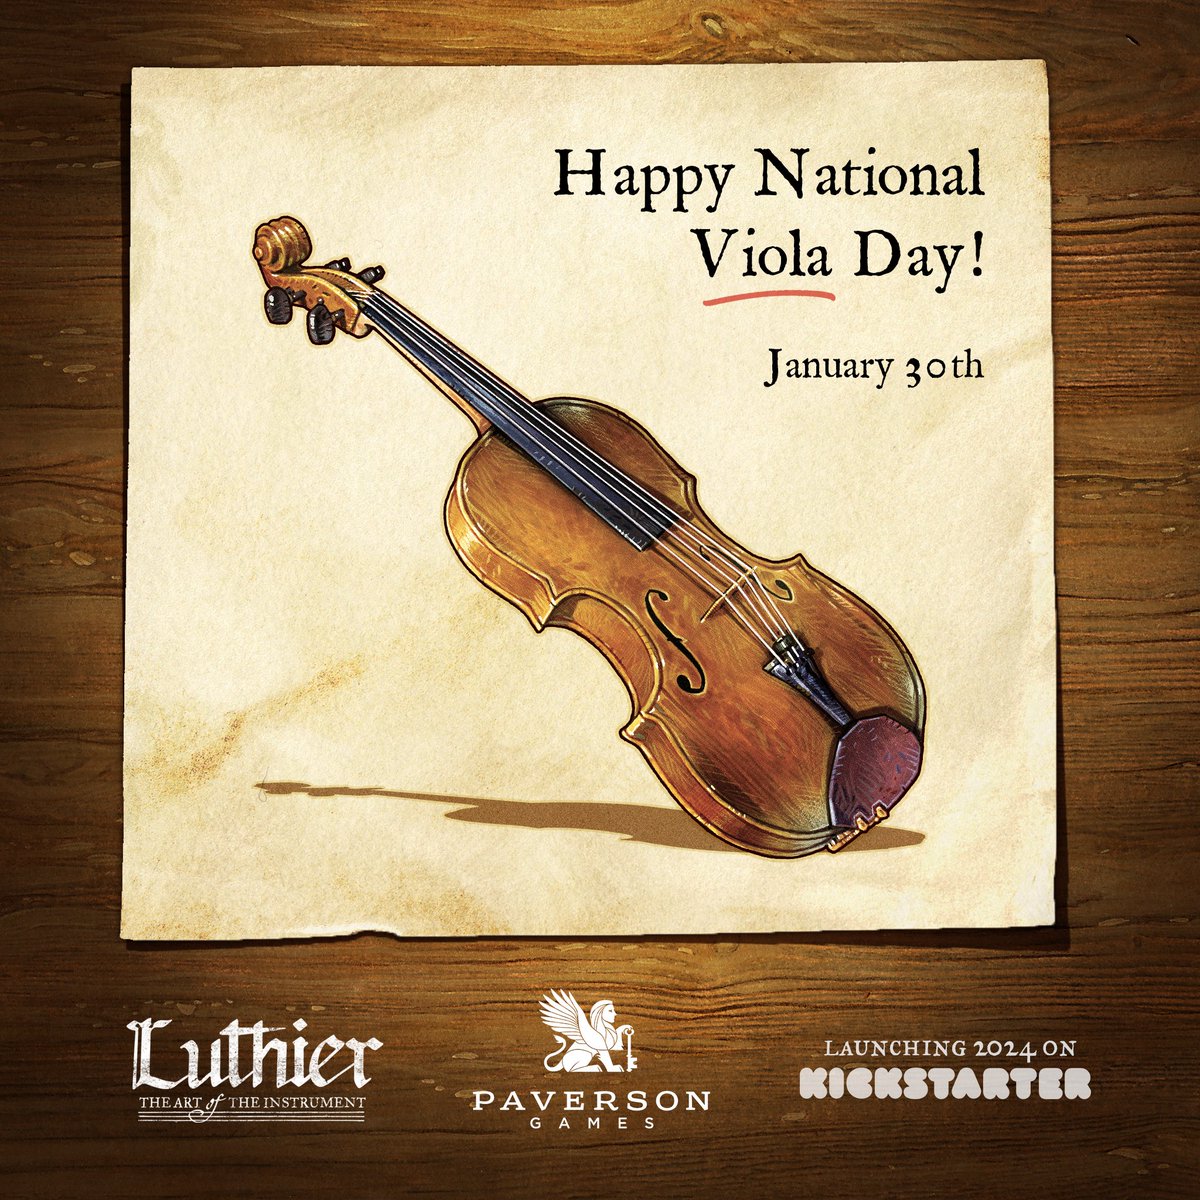 Happy National Viola Day!🎻 The #viola is a slightly bigger cousin of the #violin with its strings tuned a perfect fifth lower. #nationalvioladay #stradivari #musicalinstrument #kickstarter #luthier #luthiergame #paversongames #classicalmusic #music #vincentdutrait #illustration